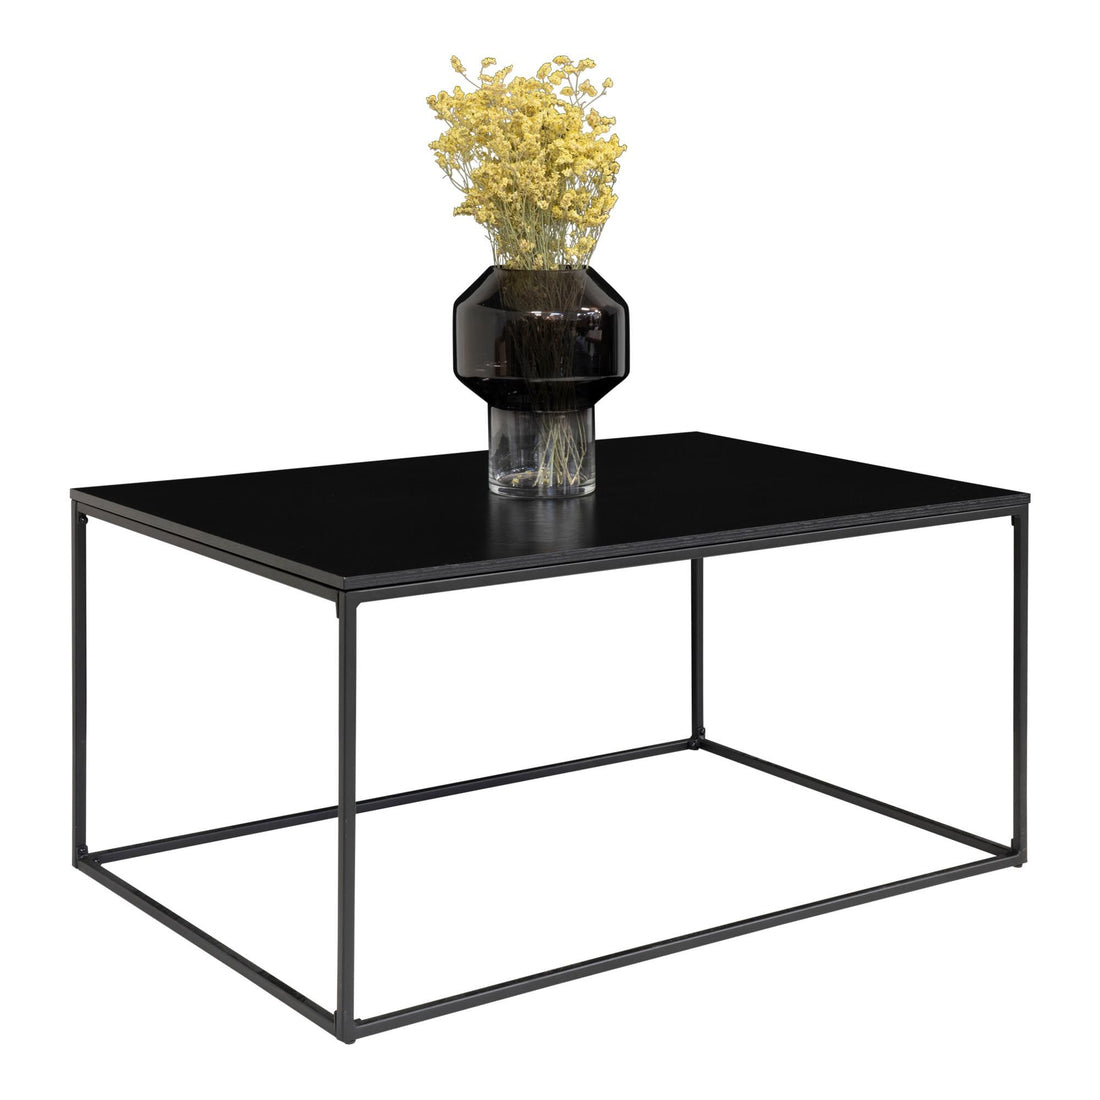 Vita Coffee Table - Coffee table with black frame and black countertop 90x60x45 cm - 1 - pcs